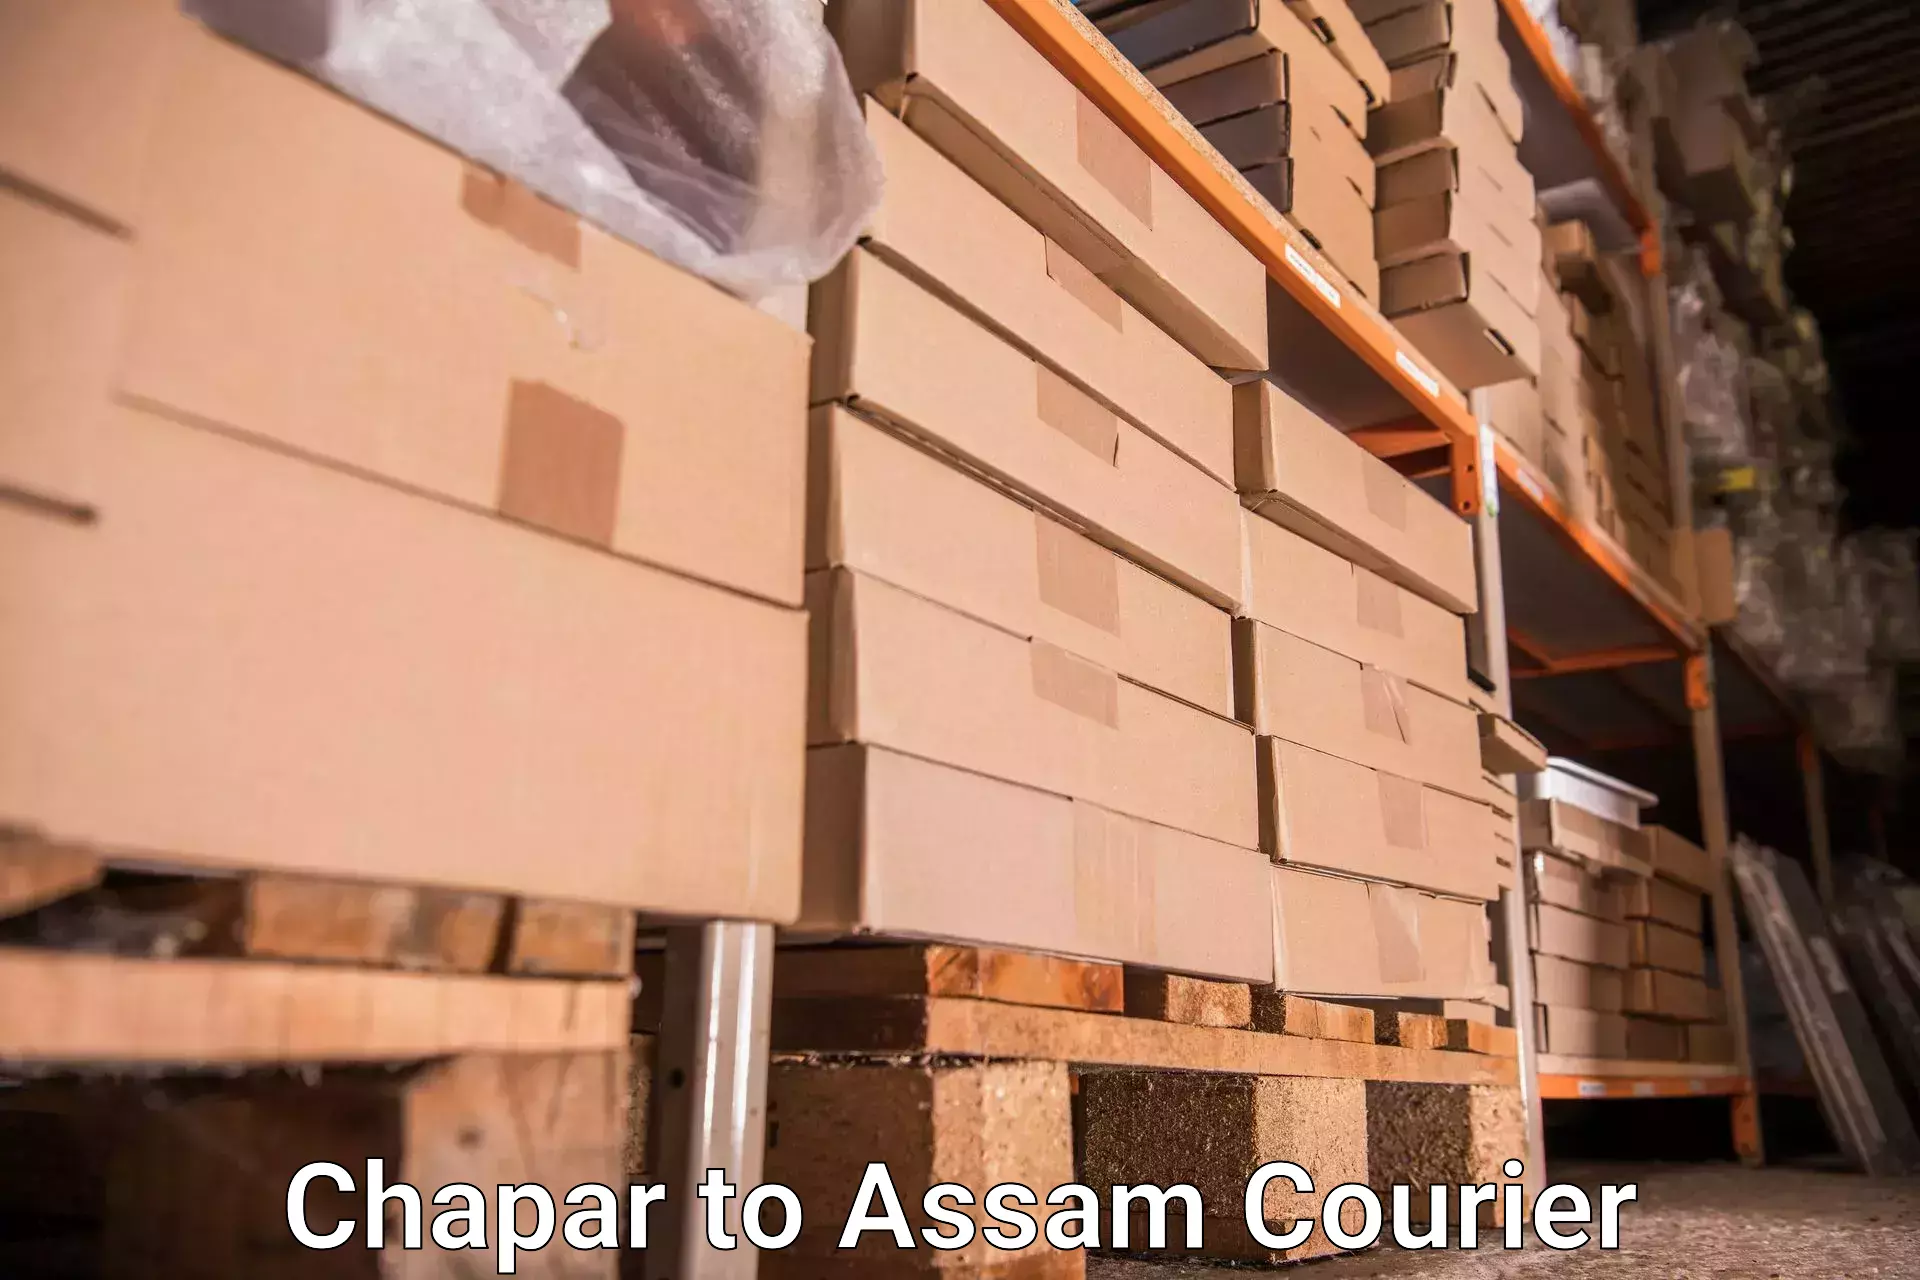 Baggage shipping experts Chapar to Assam